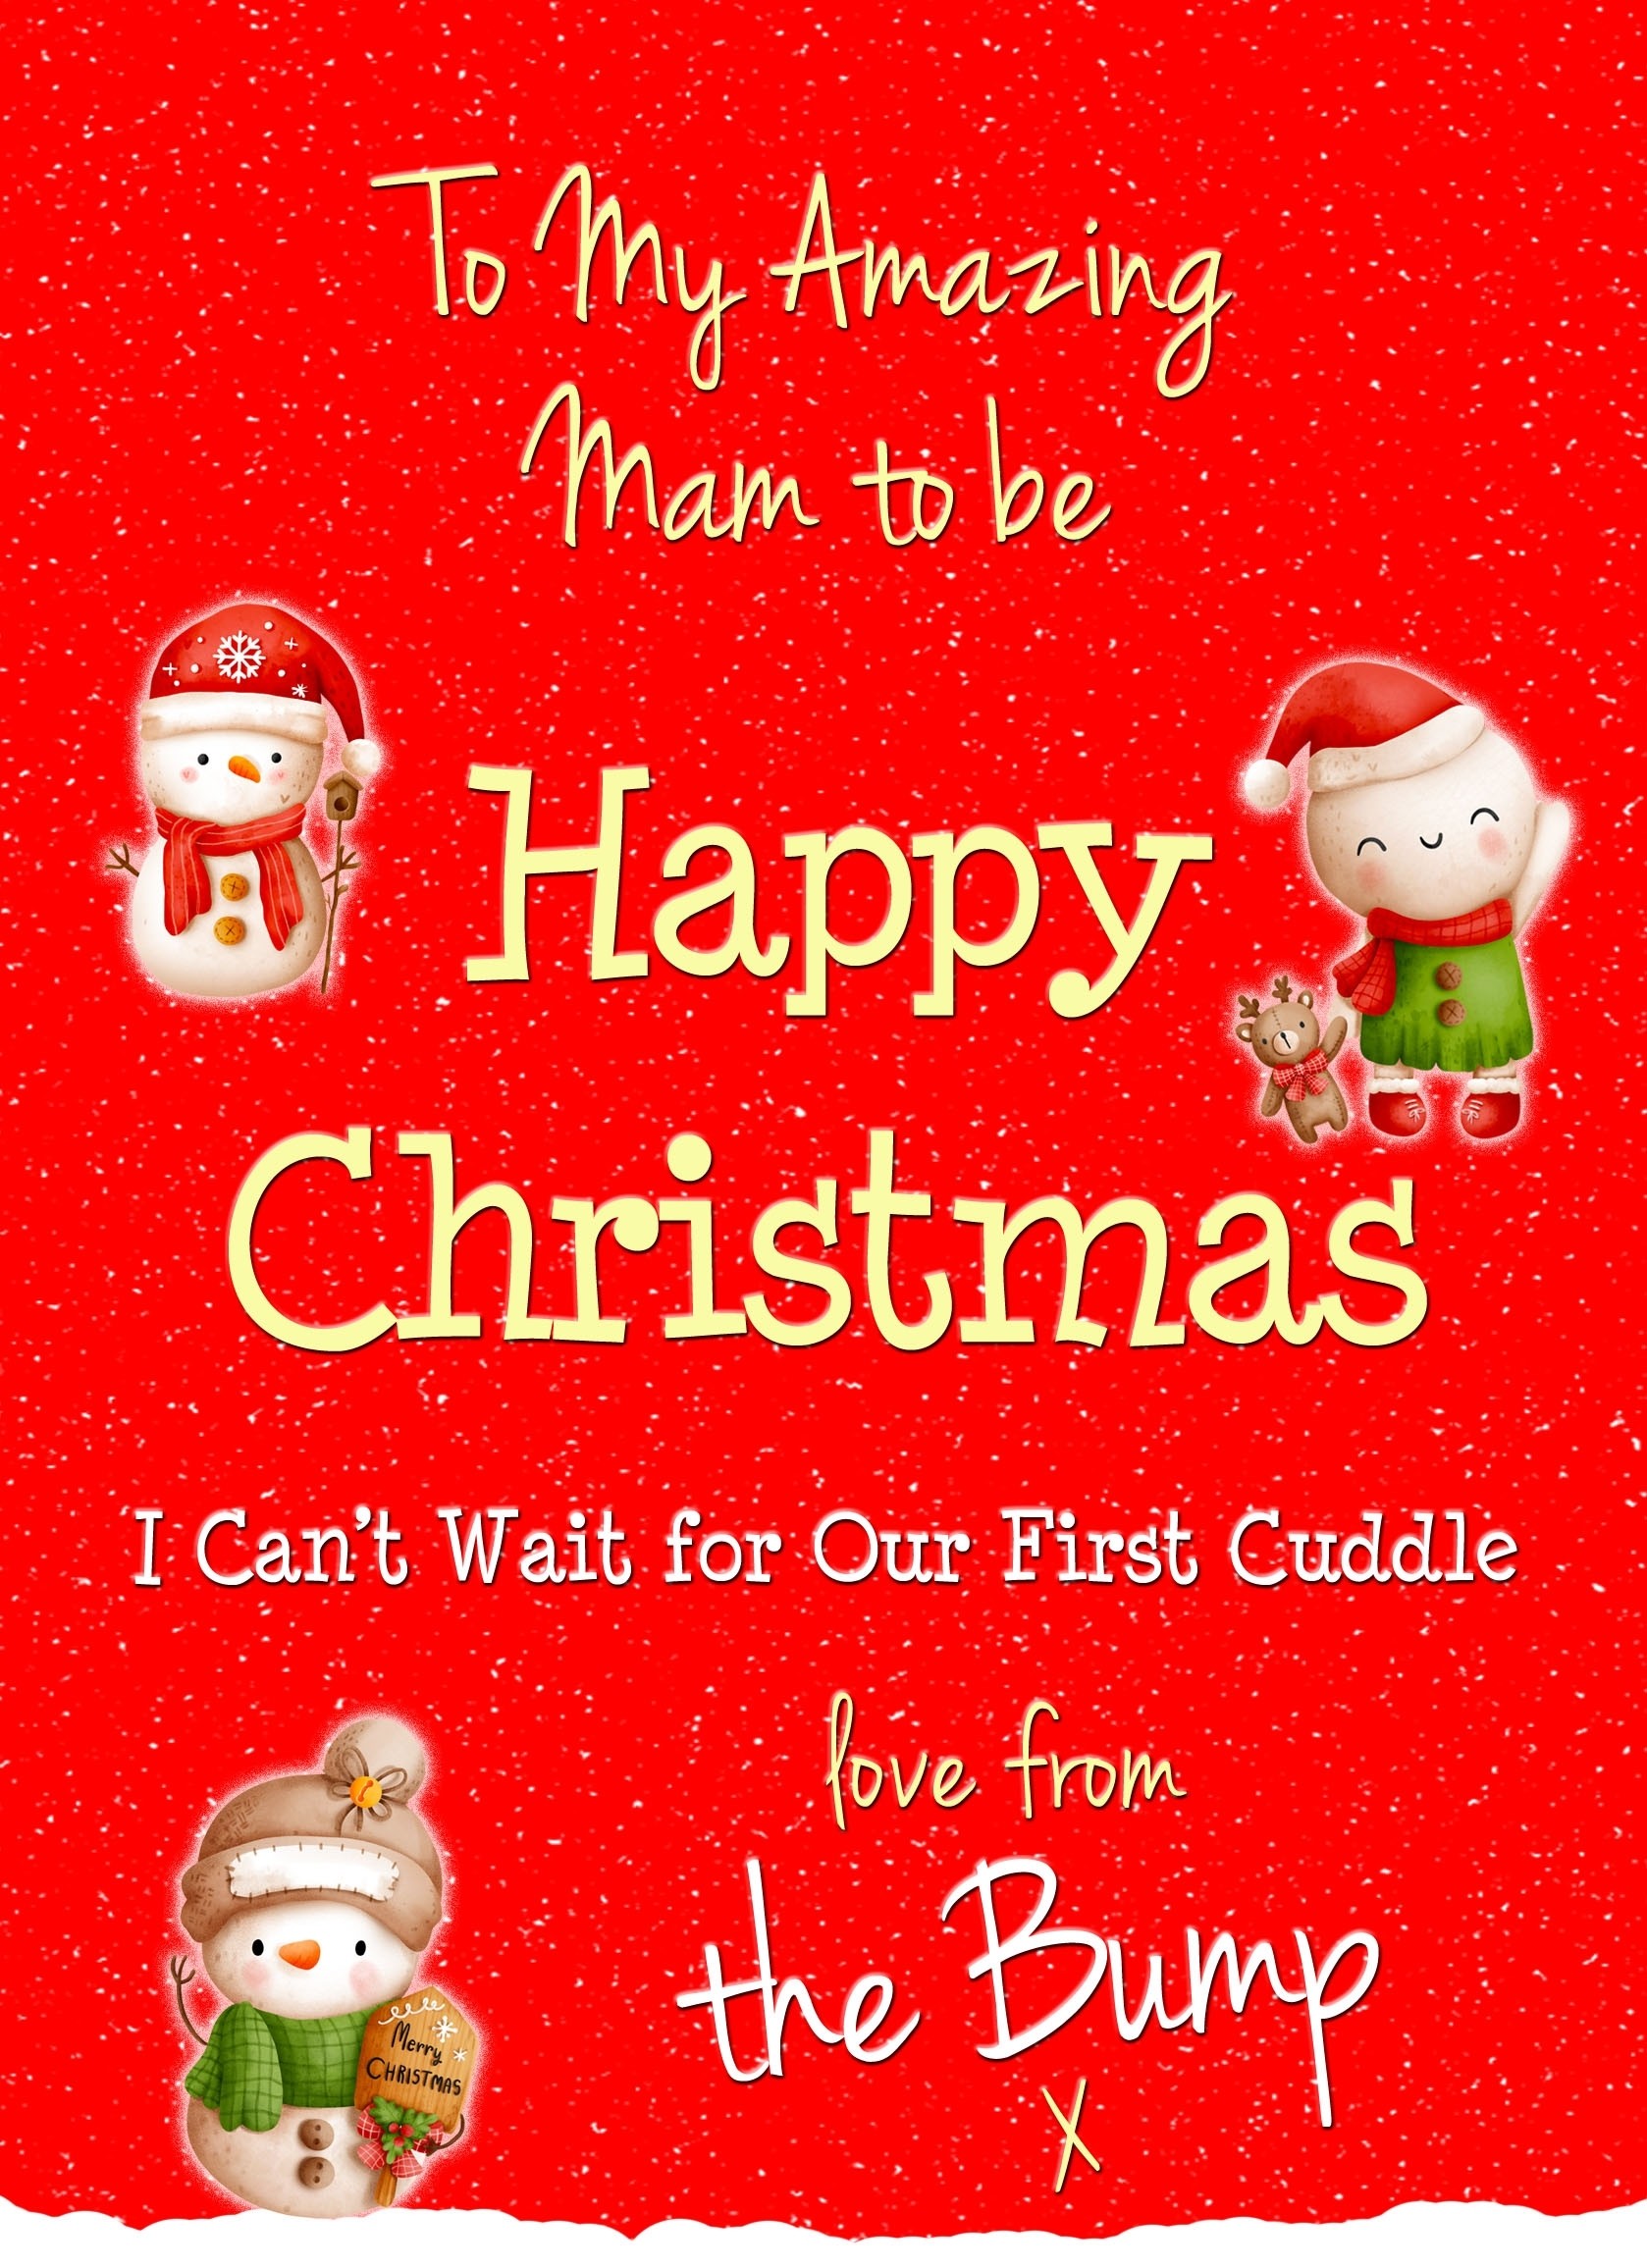 From The Bump Pregnancy Christmas Card (Mam)